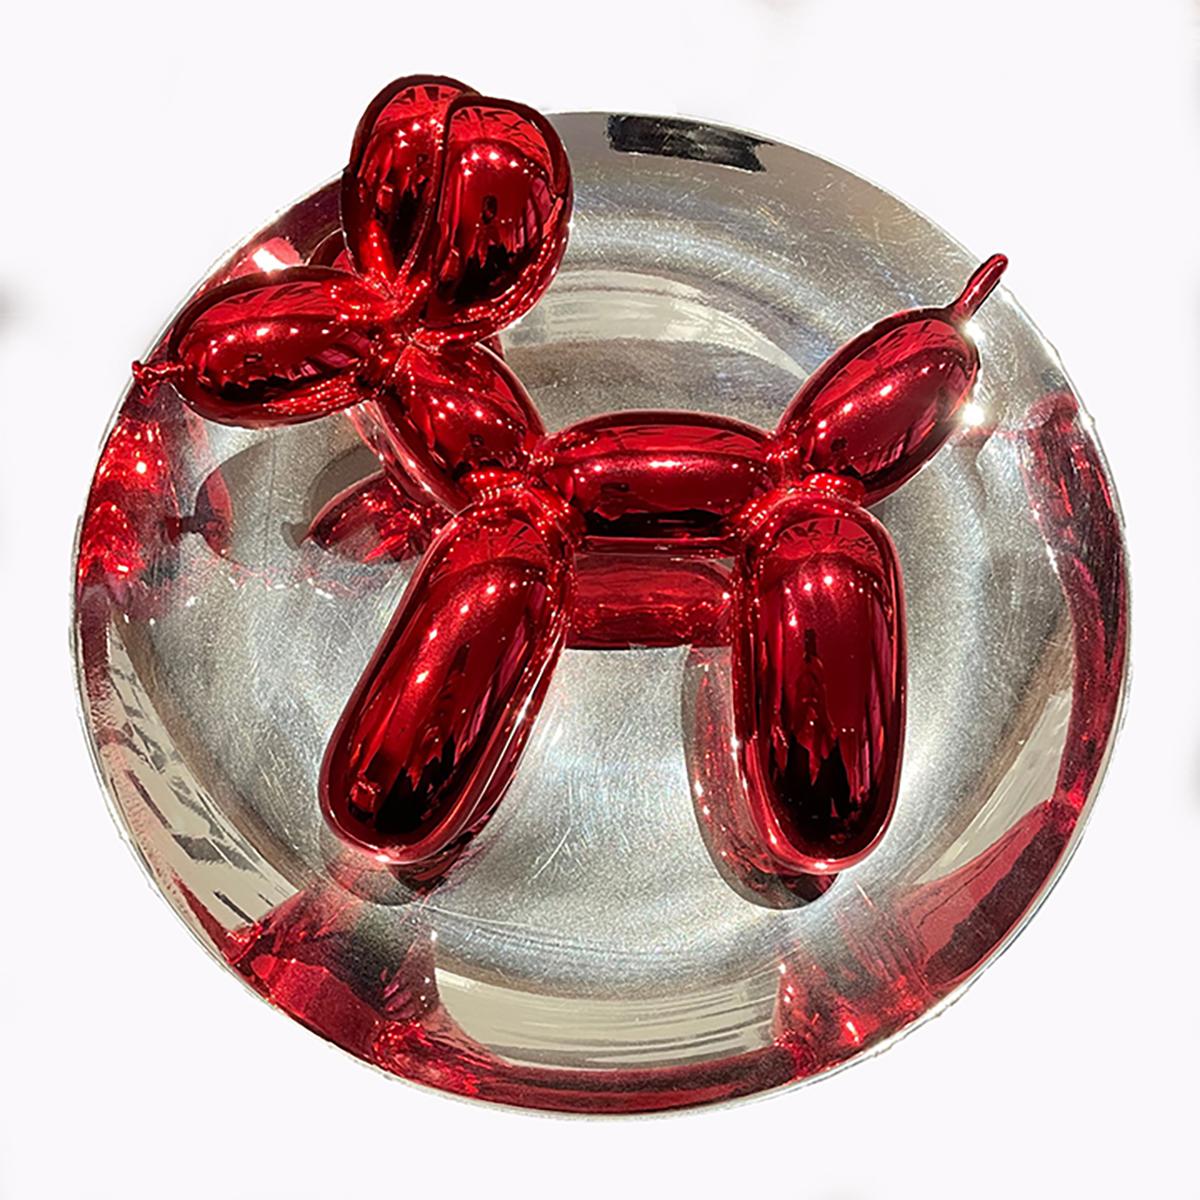 In 1995, Balloon Dog (Red) became the first of Jeff Koons’ iconic Balloon Dogs to be produced as a small-scale work, commercially viable in a way that his monumental works could not have been. Now ubiquitous in pop culture, Koons’ Balloon Dogs have